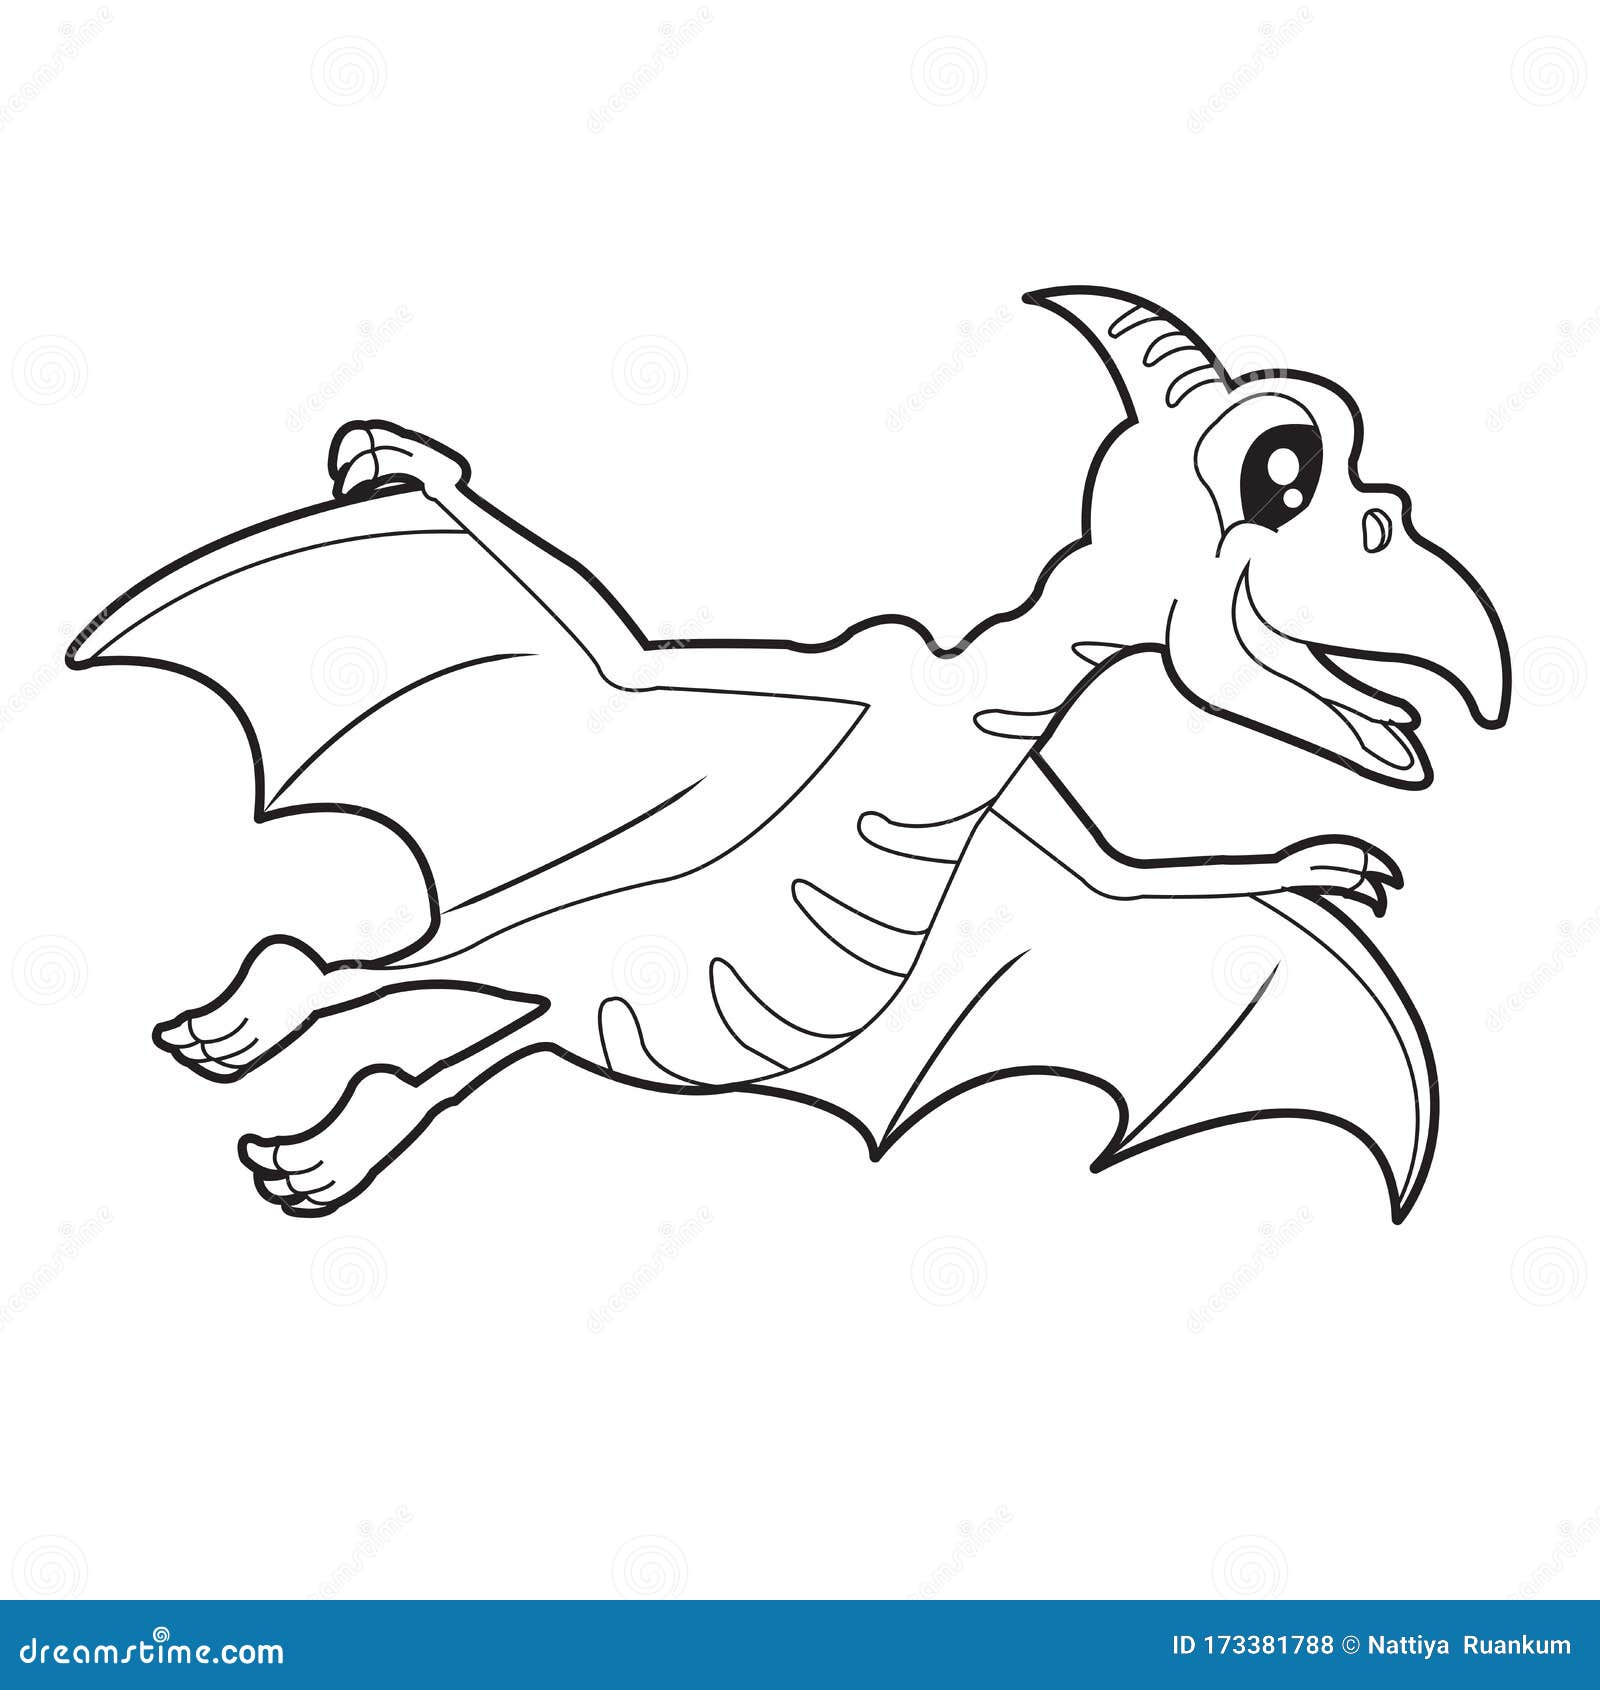 Dinosaur Colouring Page. Cute Dinosaur Coloring Page Stock Vector -  Illustration of coloring, dragon: 173381788